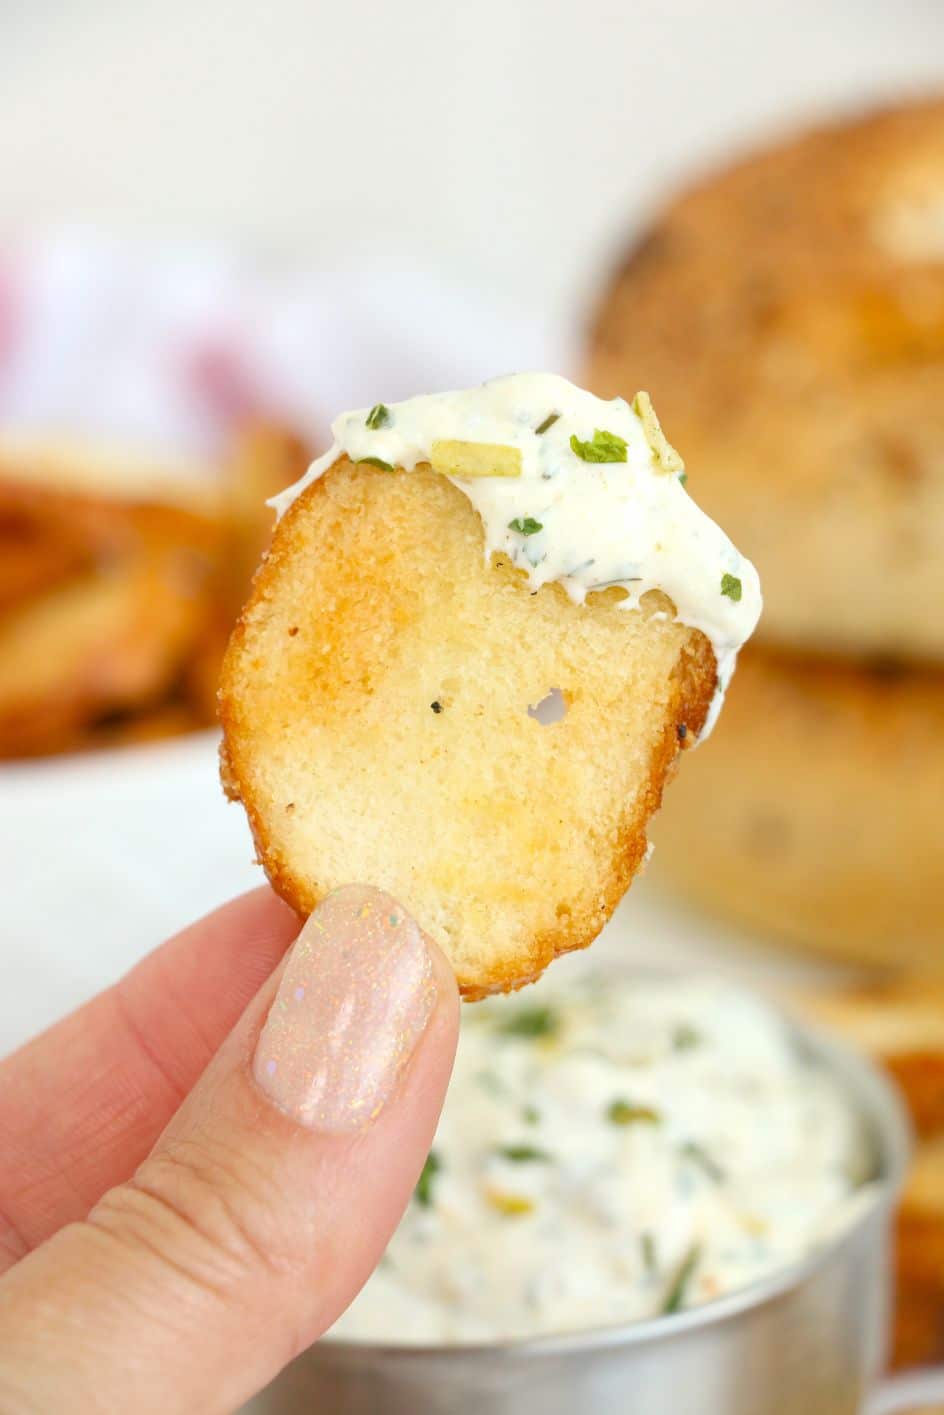 Bagel bites dipped into a creamy dip and held up with a hand